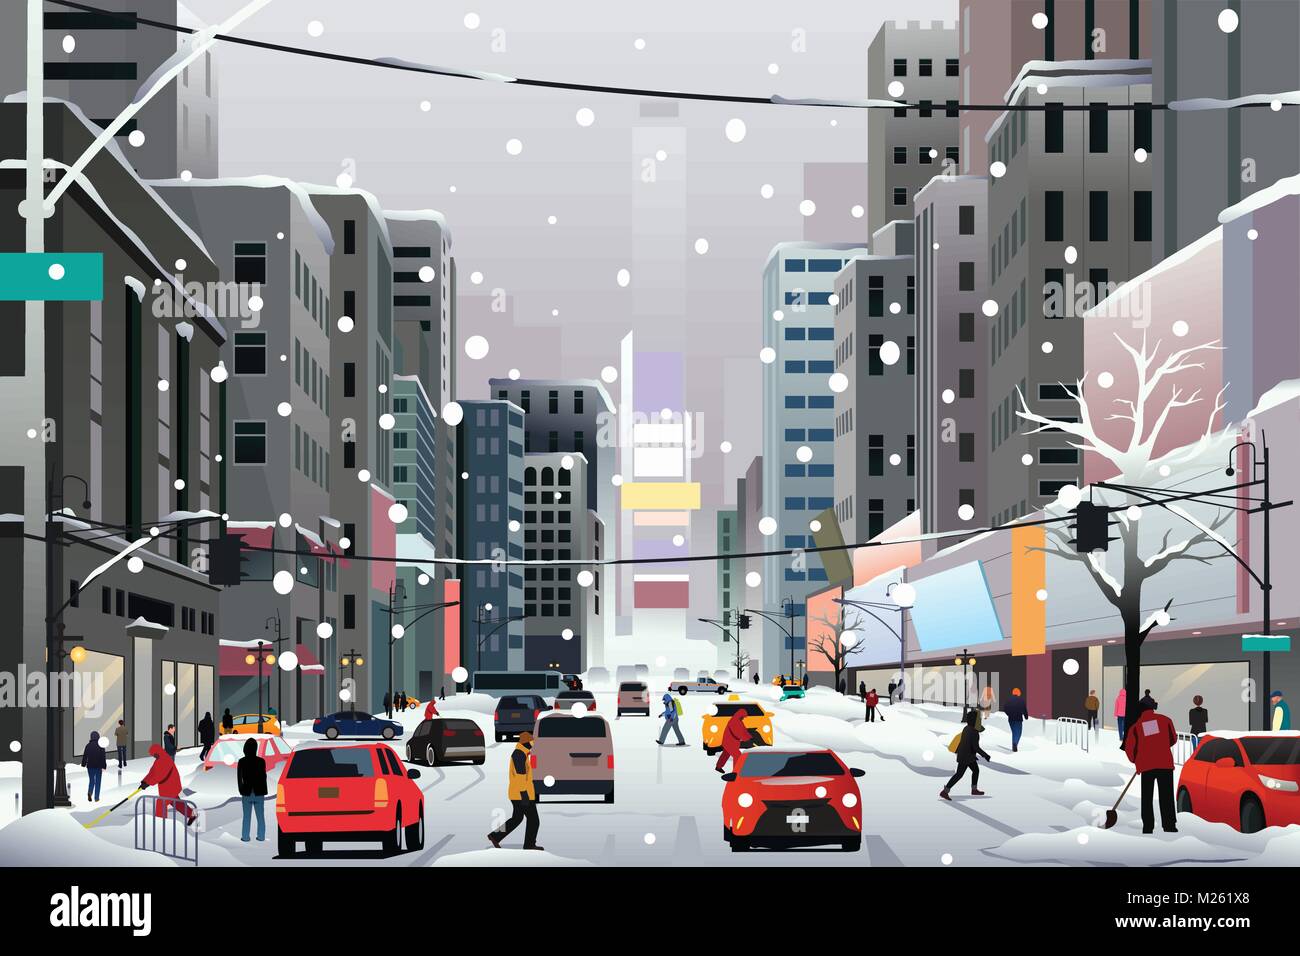 A vector illustration of People Walking in the City During Winter Storm Stock Vector